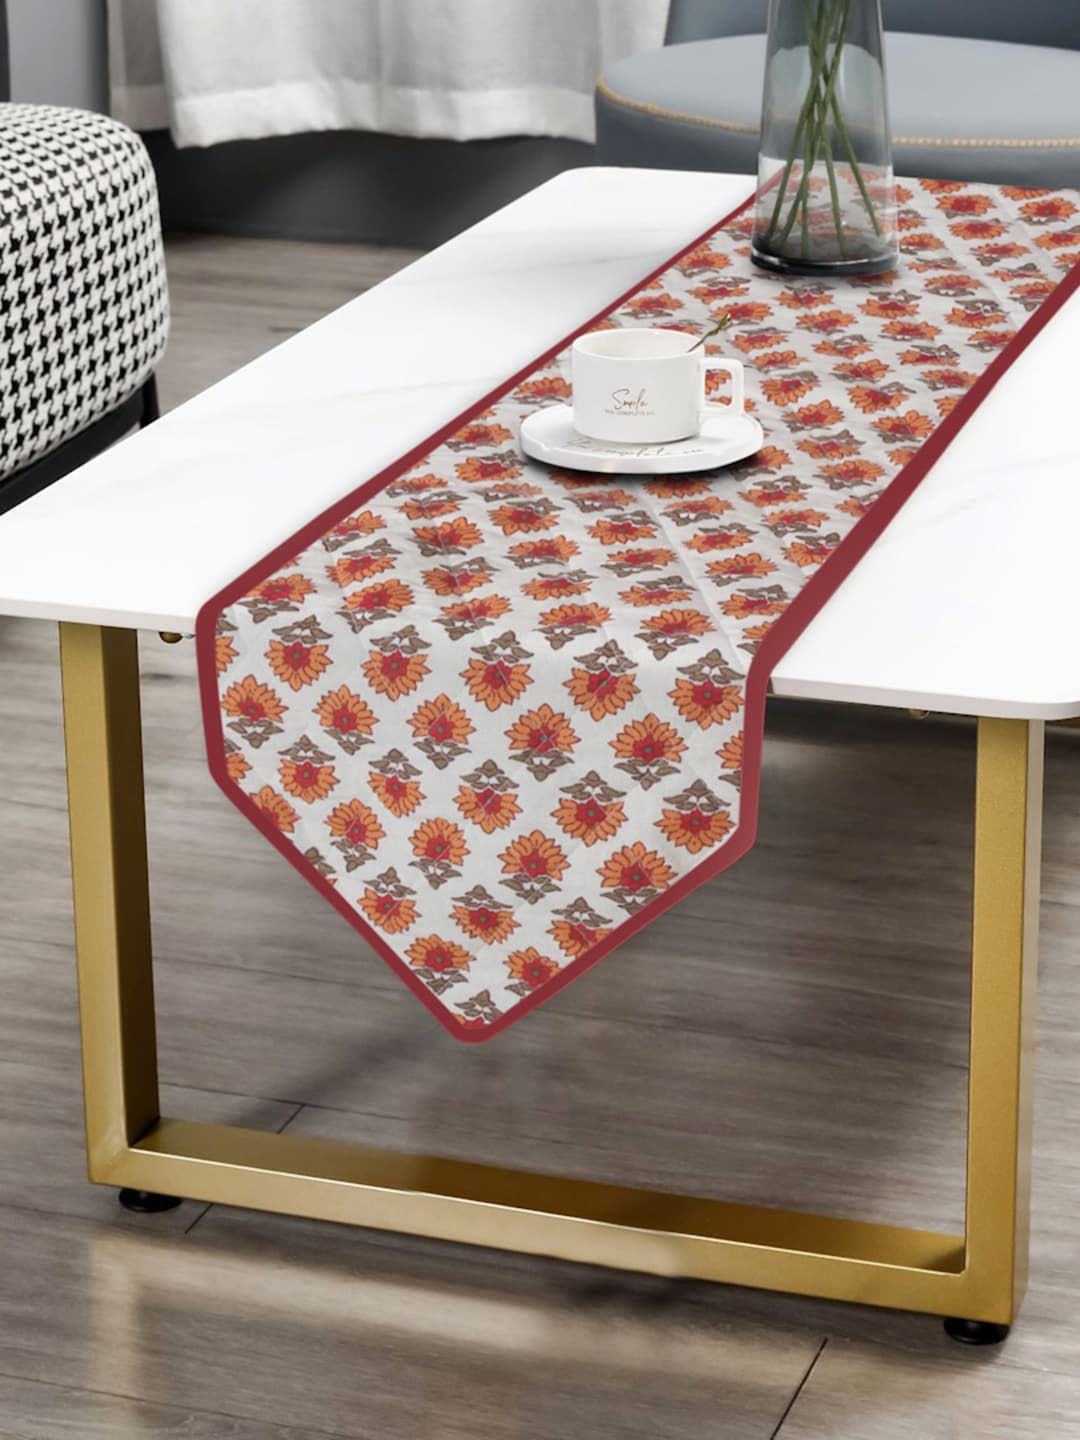 Rajasthan Decor White & Orange Printed Pure Cotton Table Runners Price in India